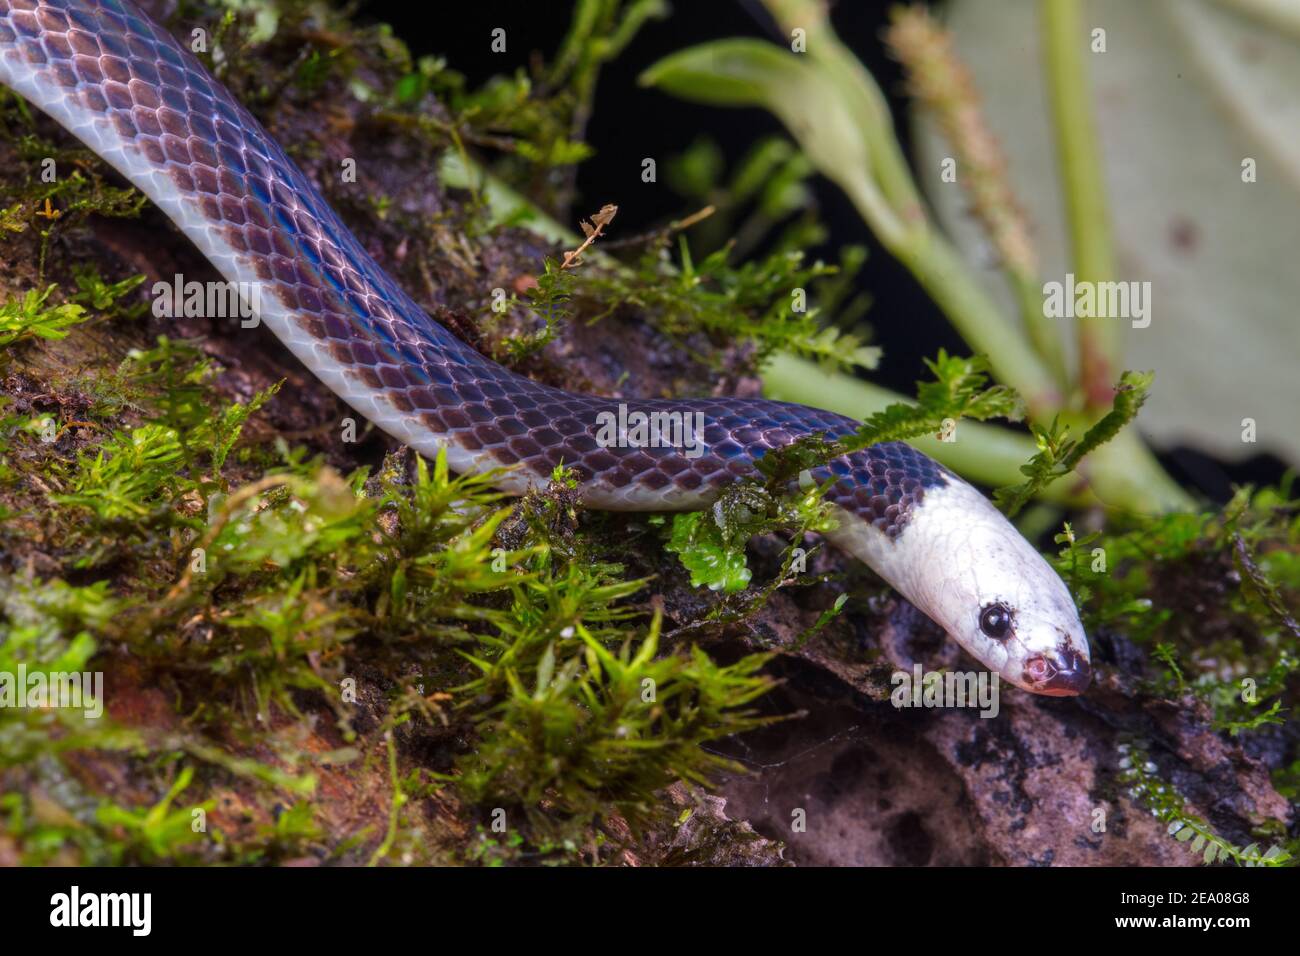 A white - headed snake, Enulius sclateri, foraging on a mossy tree trunk. Stock Photo